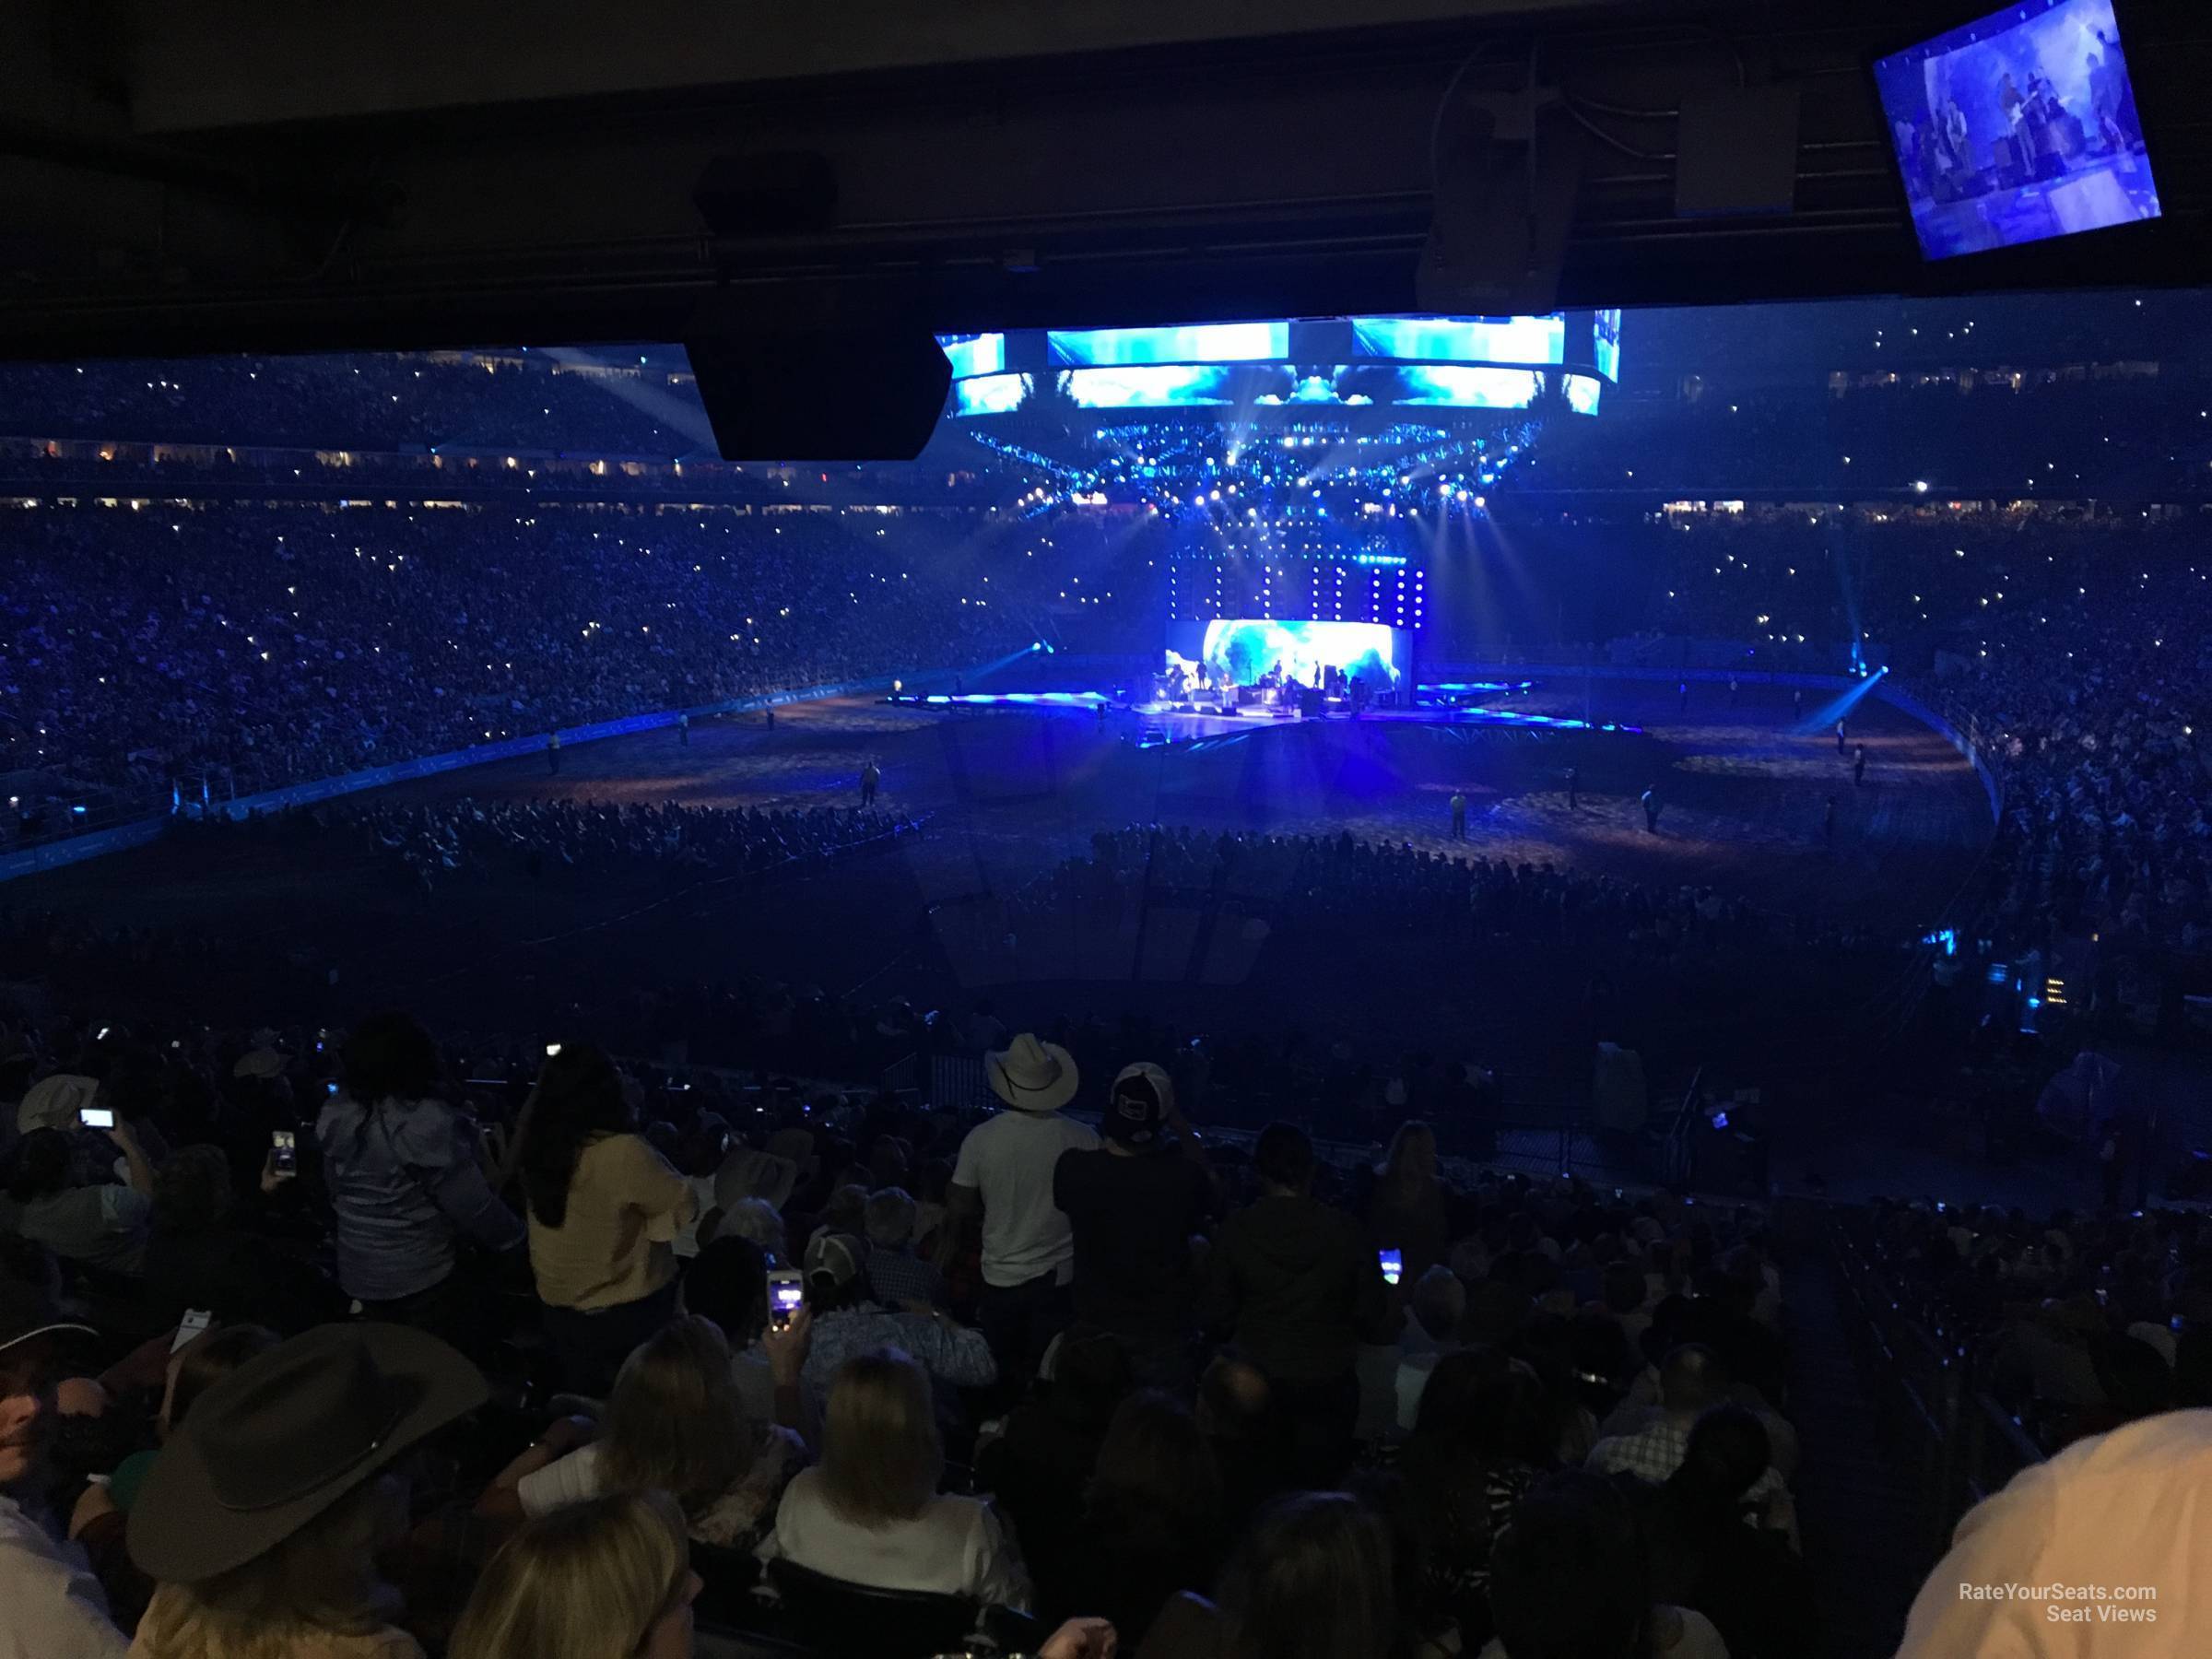 section 115, row hh seat view  for concert - nrg stadium